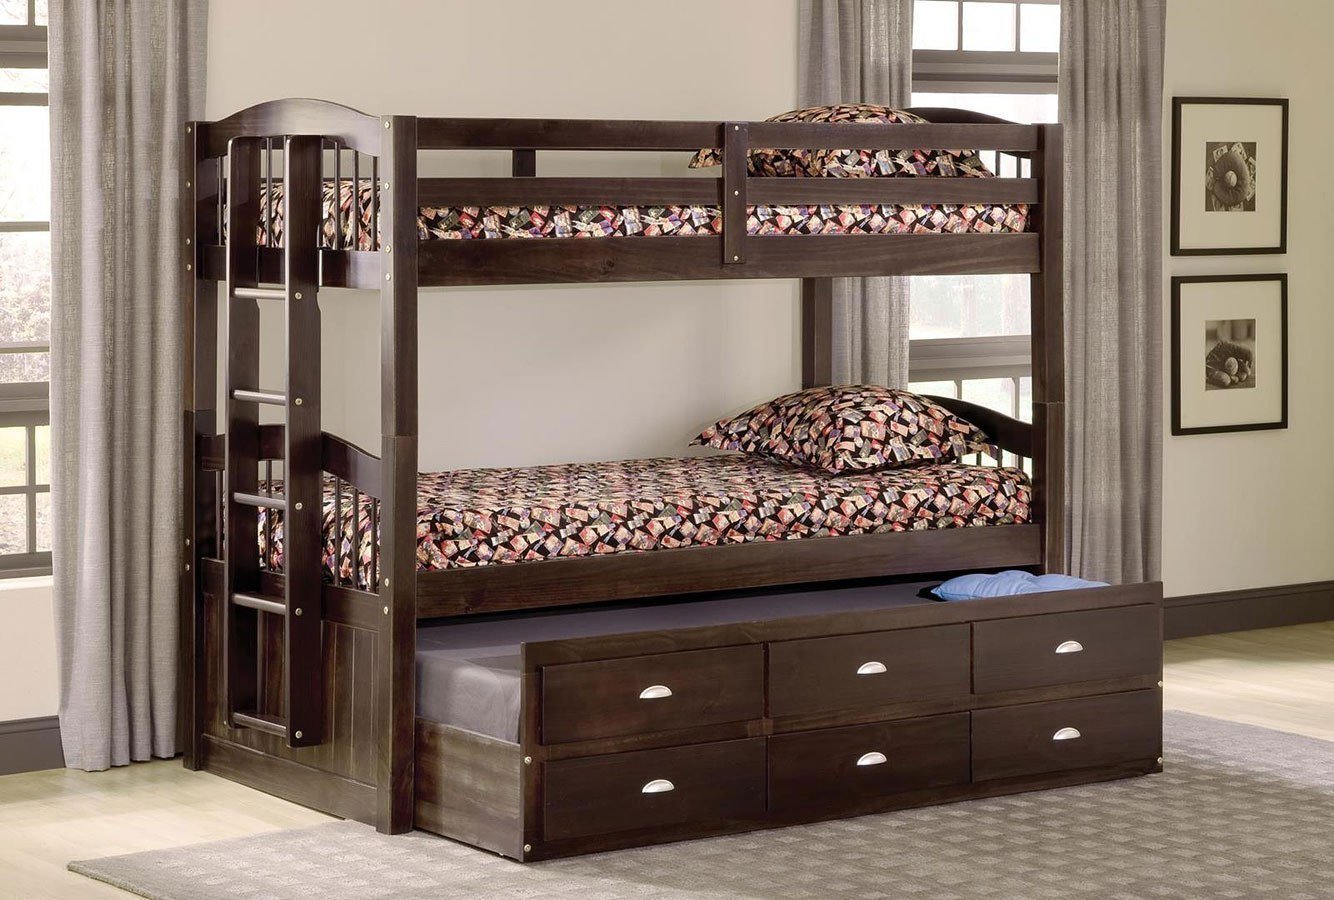 sandler bunk bed with drawers